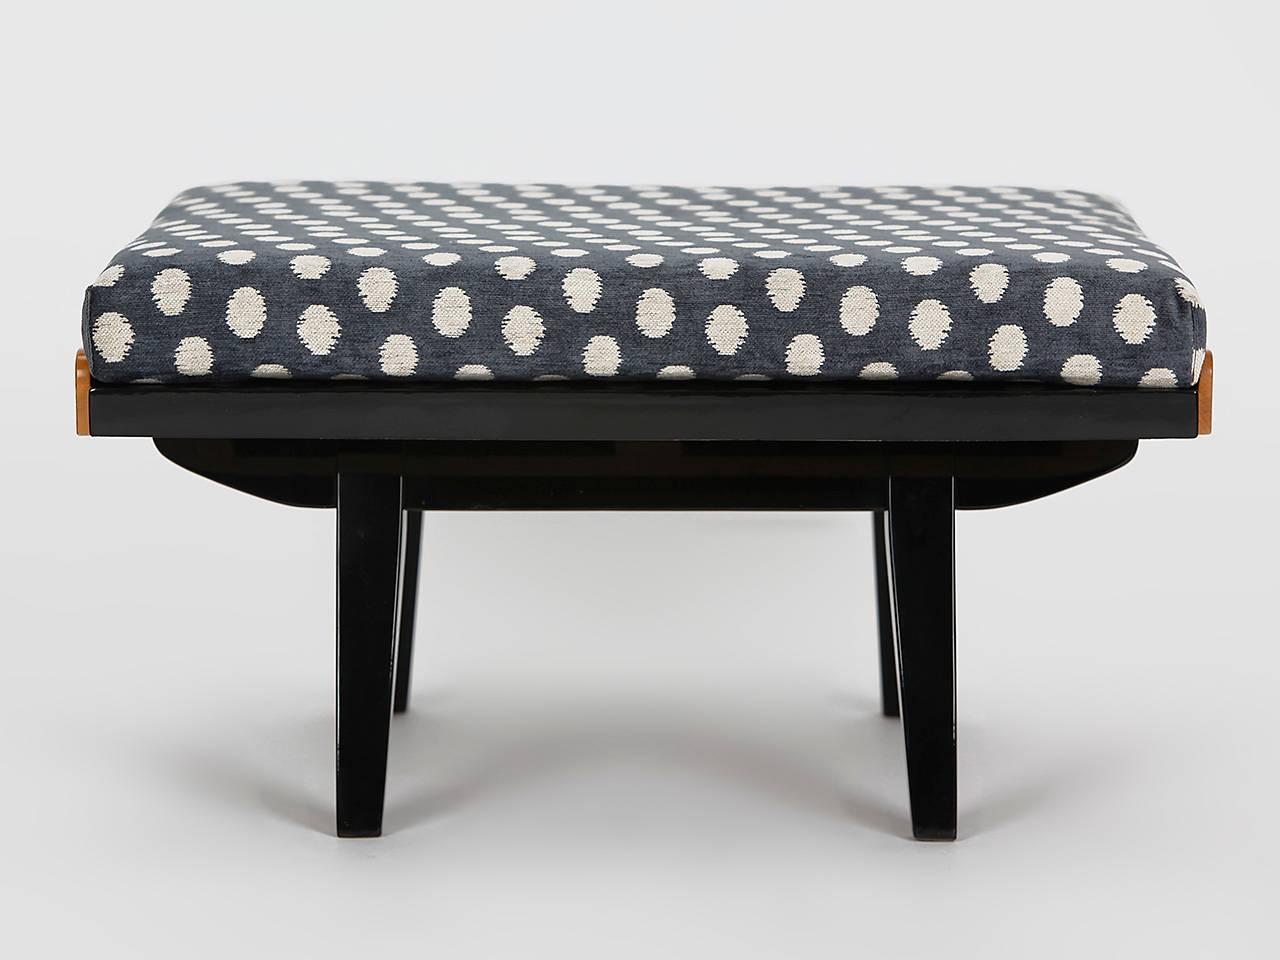 Coffee table from Tatra Pravenec, Tschechoslowakei, 1960s, full restored
Originally designed as a low side table.
Can also be used as a footstool with a coconut fiber and sheepwool cushion.
Surface black piano lacquer and birch veneer